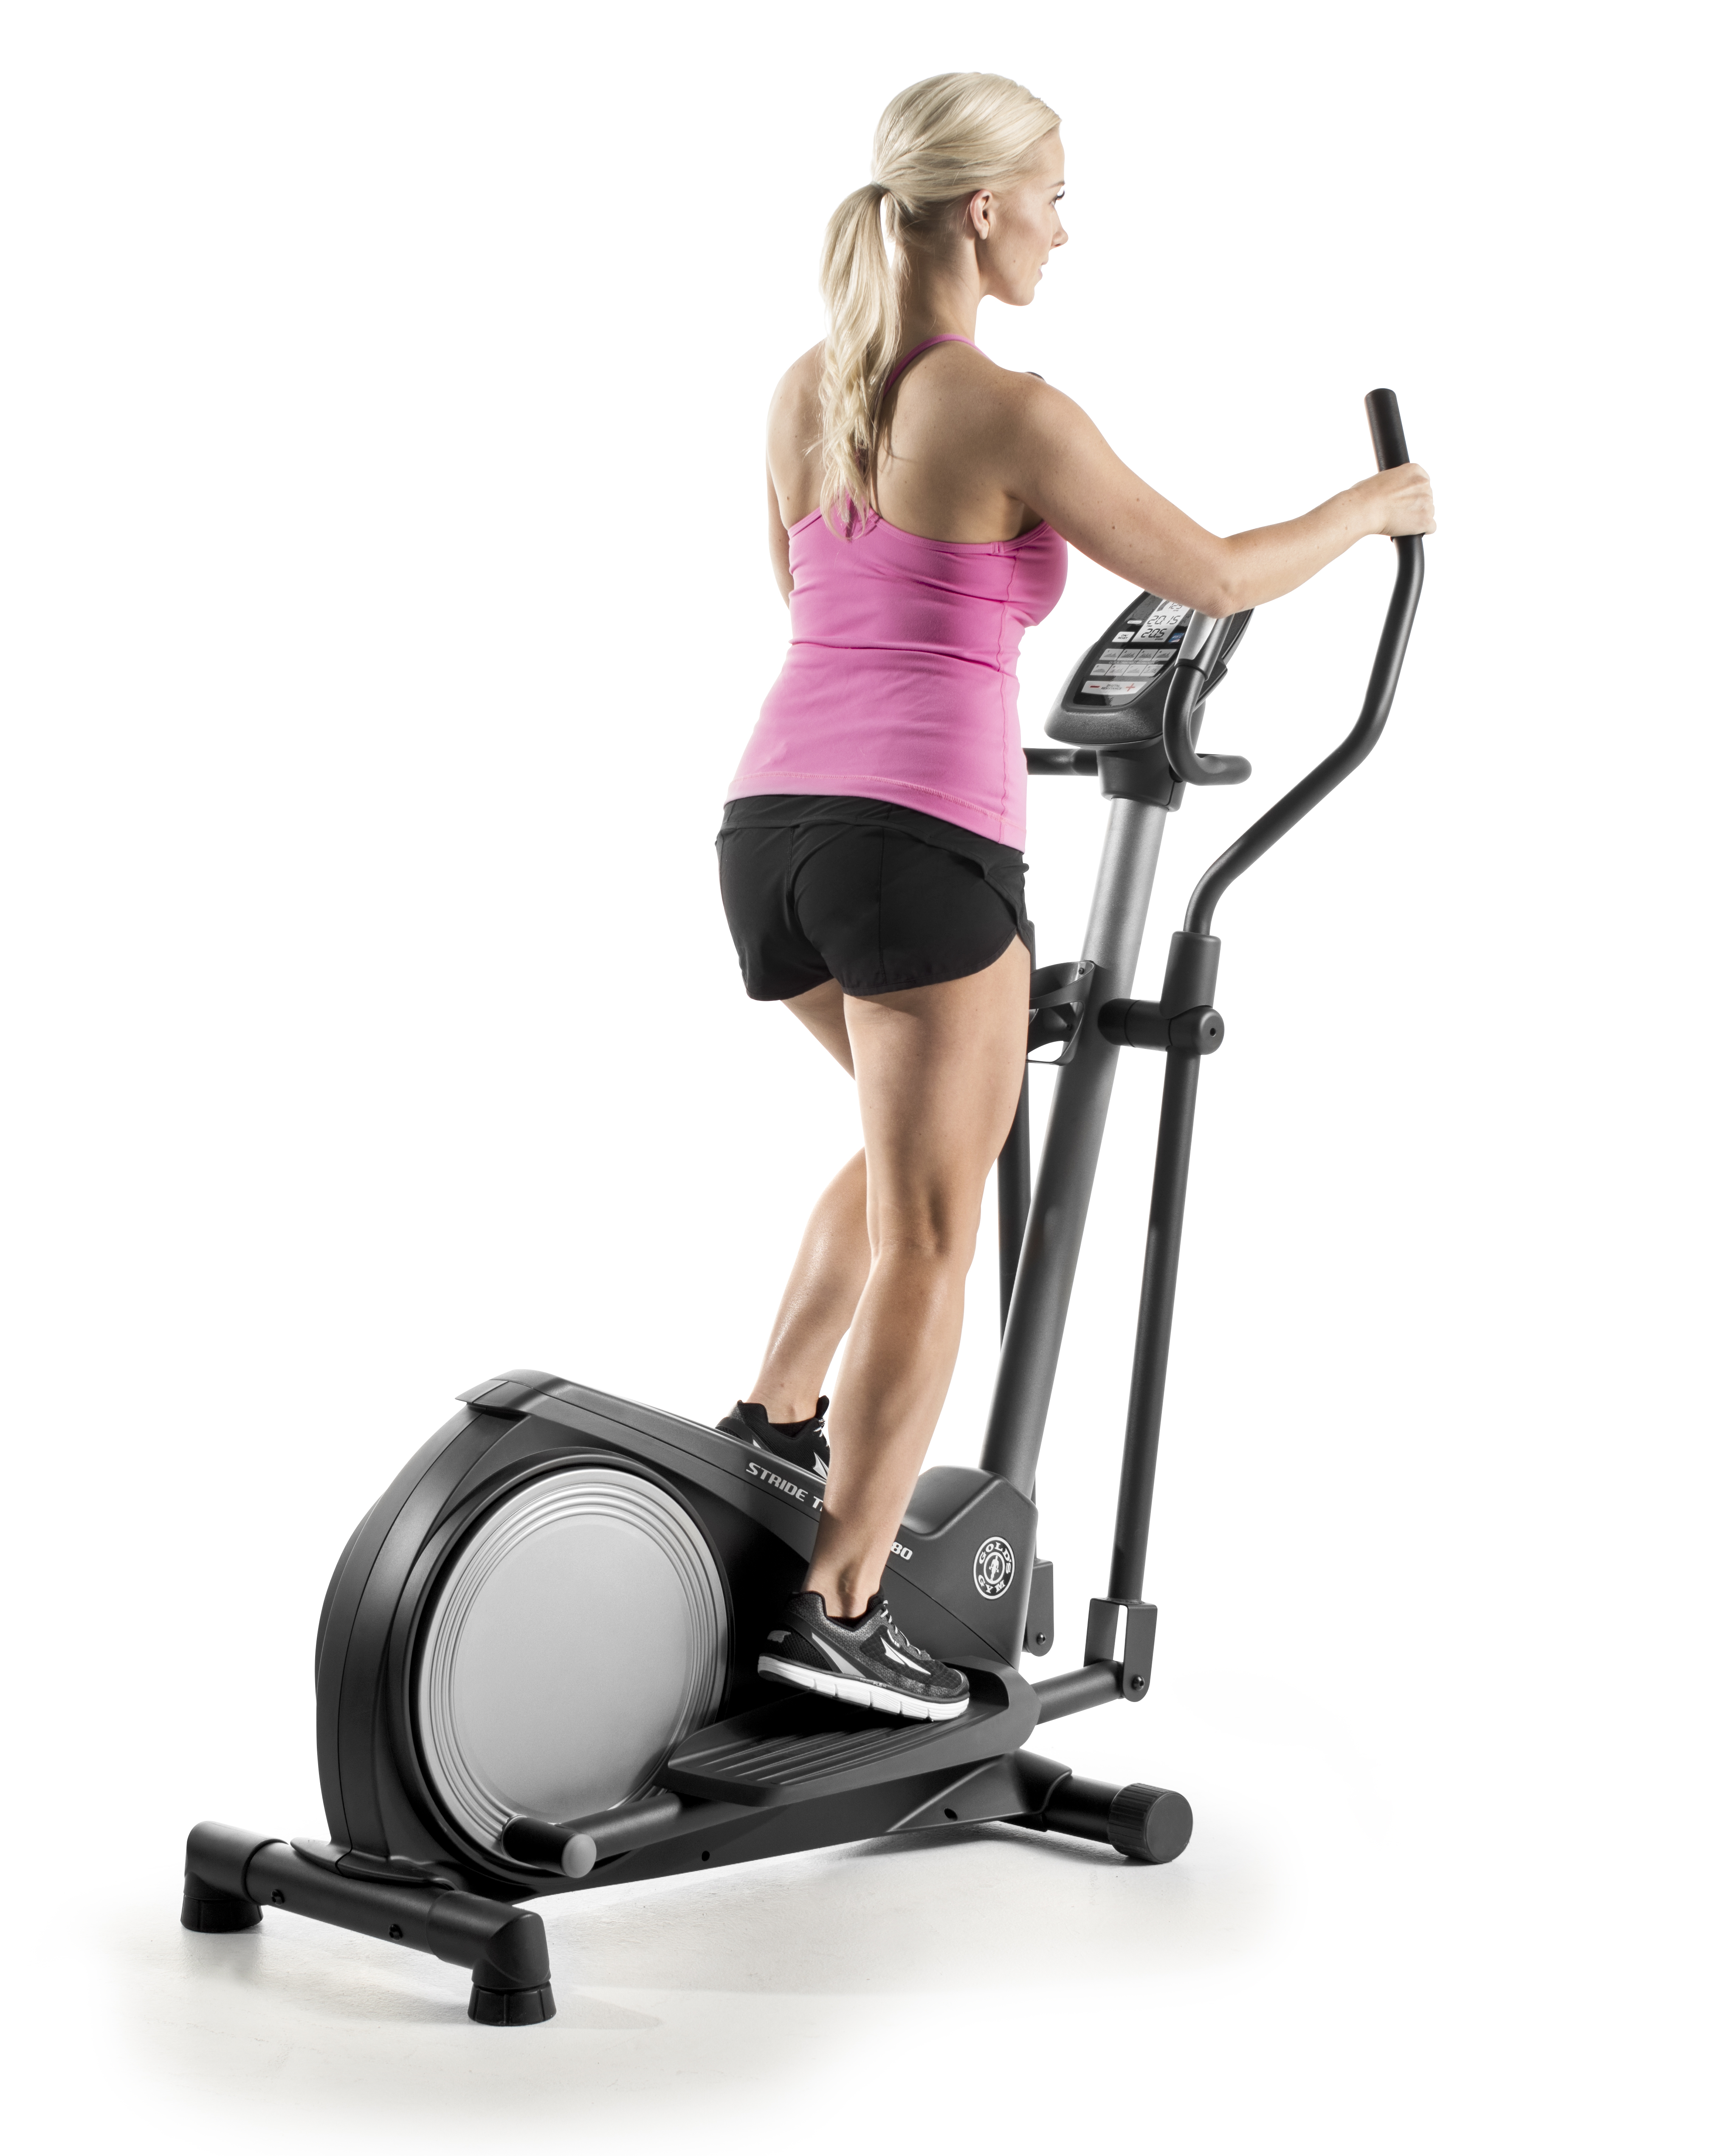 Gold's Gym Stride Trainer 380 Elliptical, iFit Coach Compatible - image 6 of 9